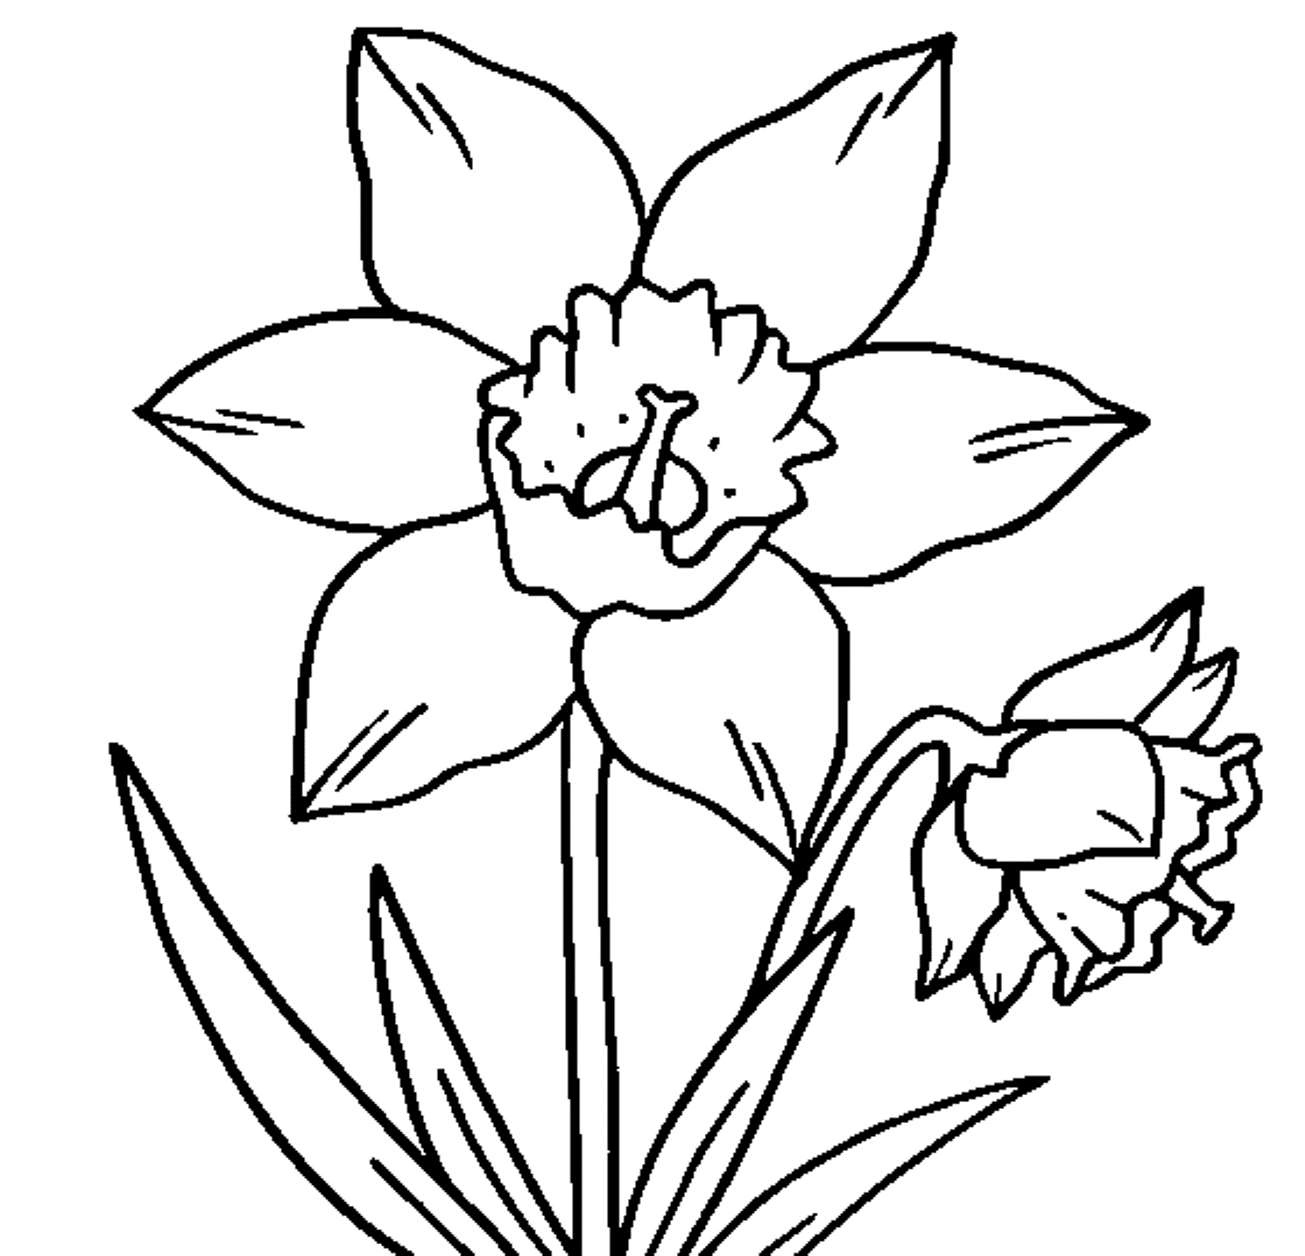 Printable Crocus Flower Coloring Page | Flower Coloring pages of ...